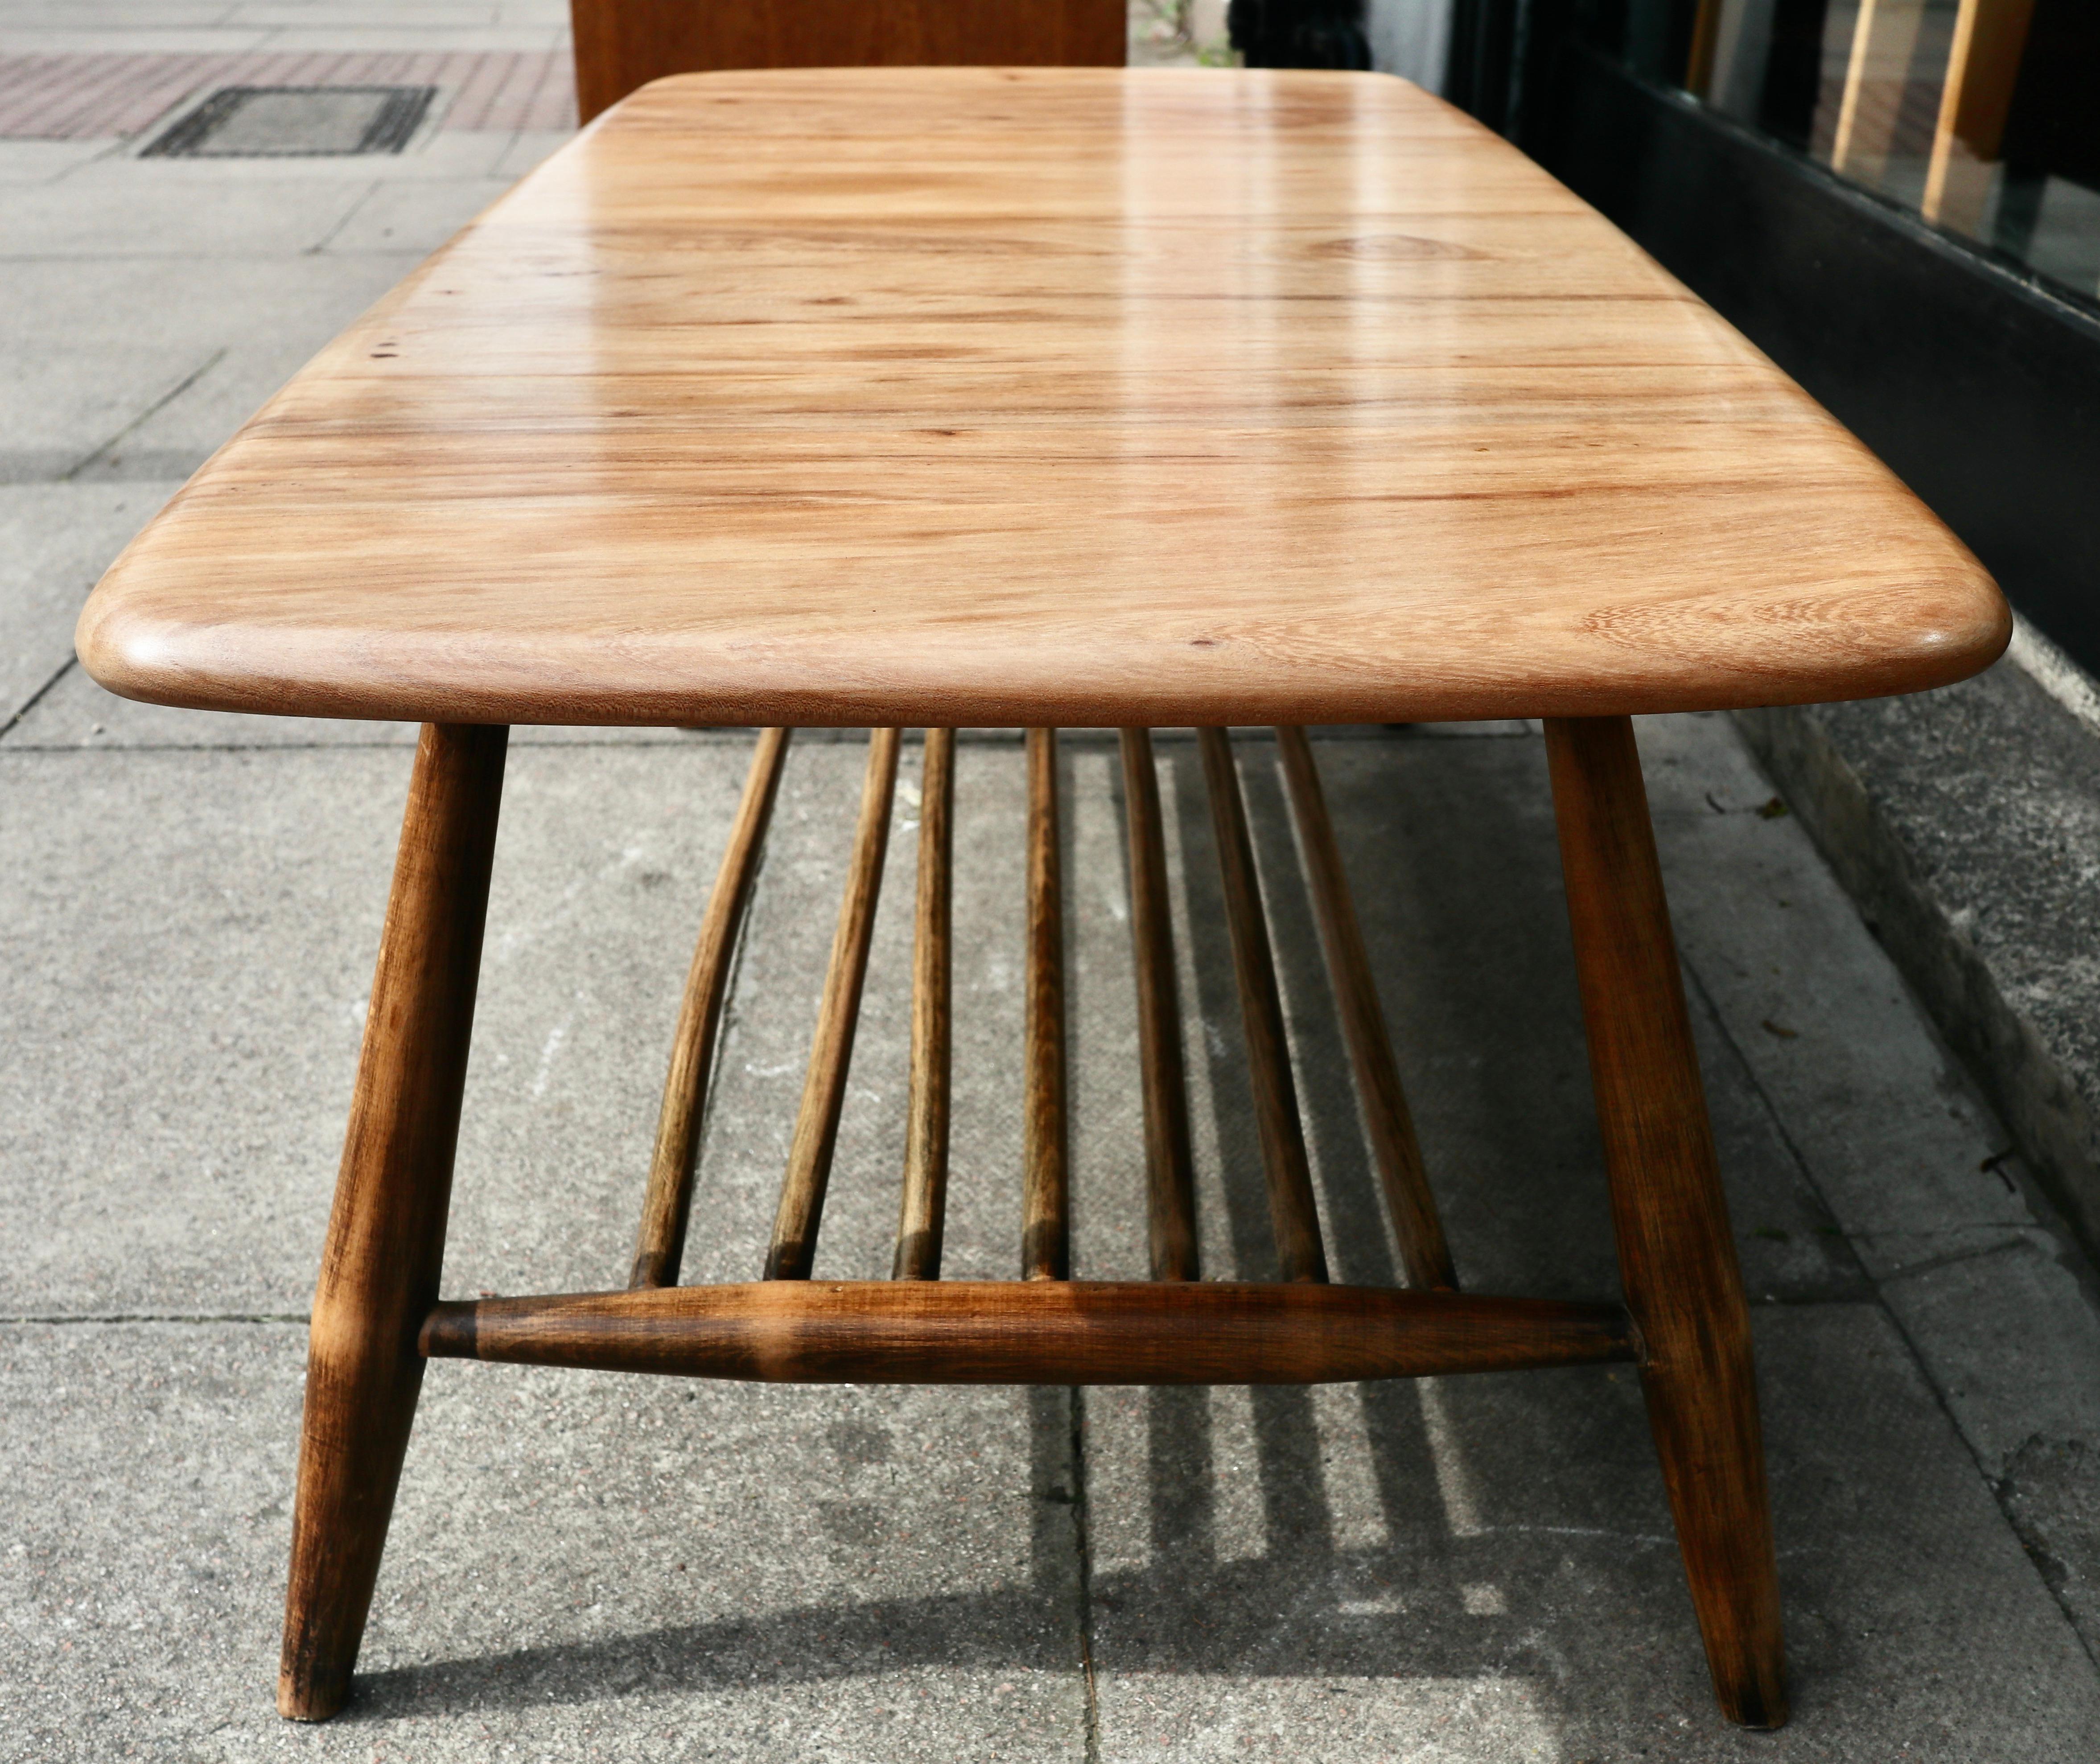 Vintage 1960s Ercol coffee table with magazine rack. This table has a, particularly figured and beautiful, solid elm top and solid stained beech base. It is in very good vintage condition with the top having been stripped of it's stain, varnished